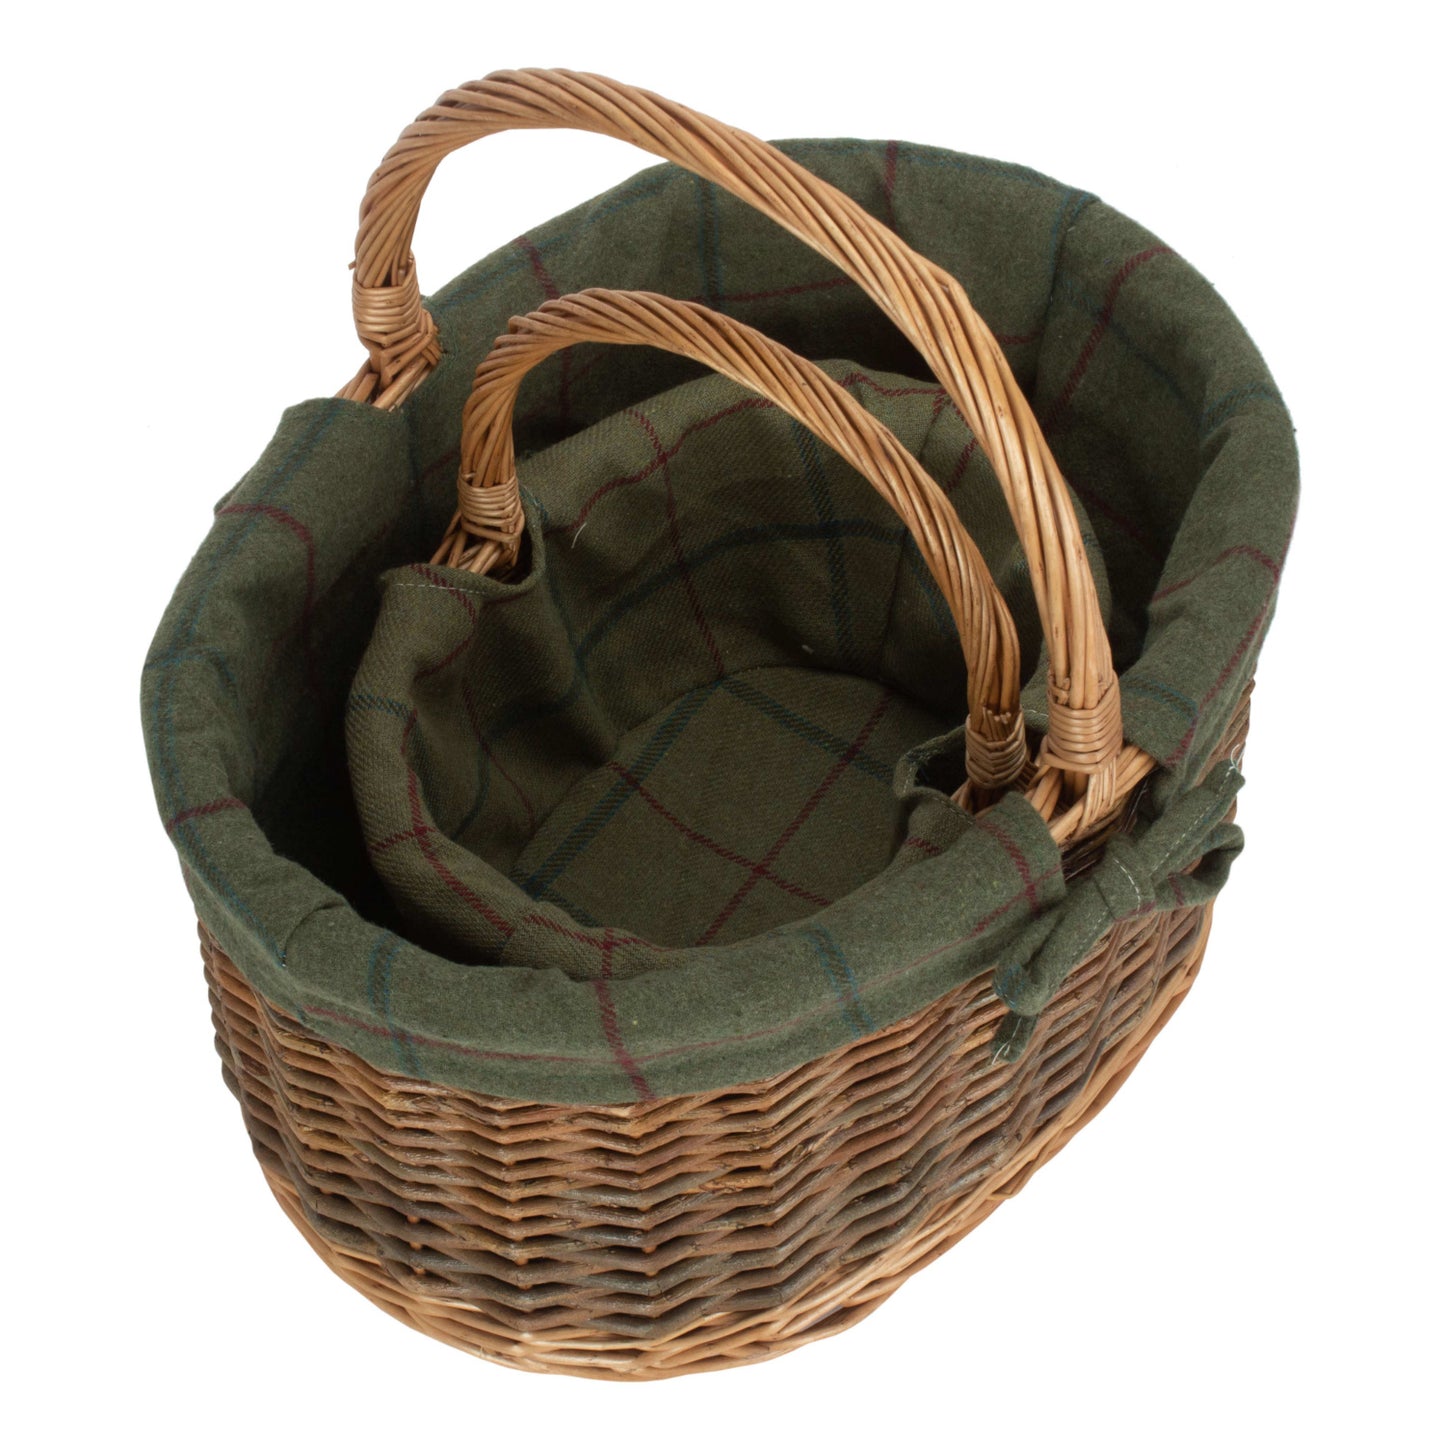 Country Oval Shopper With Green Tweed Lining Set 2